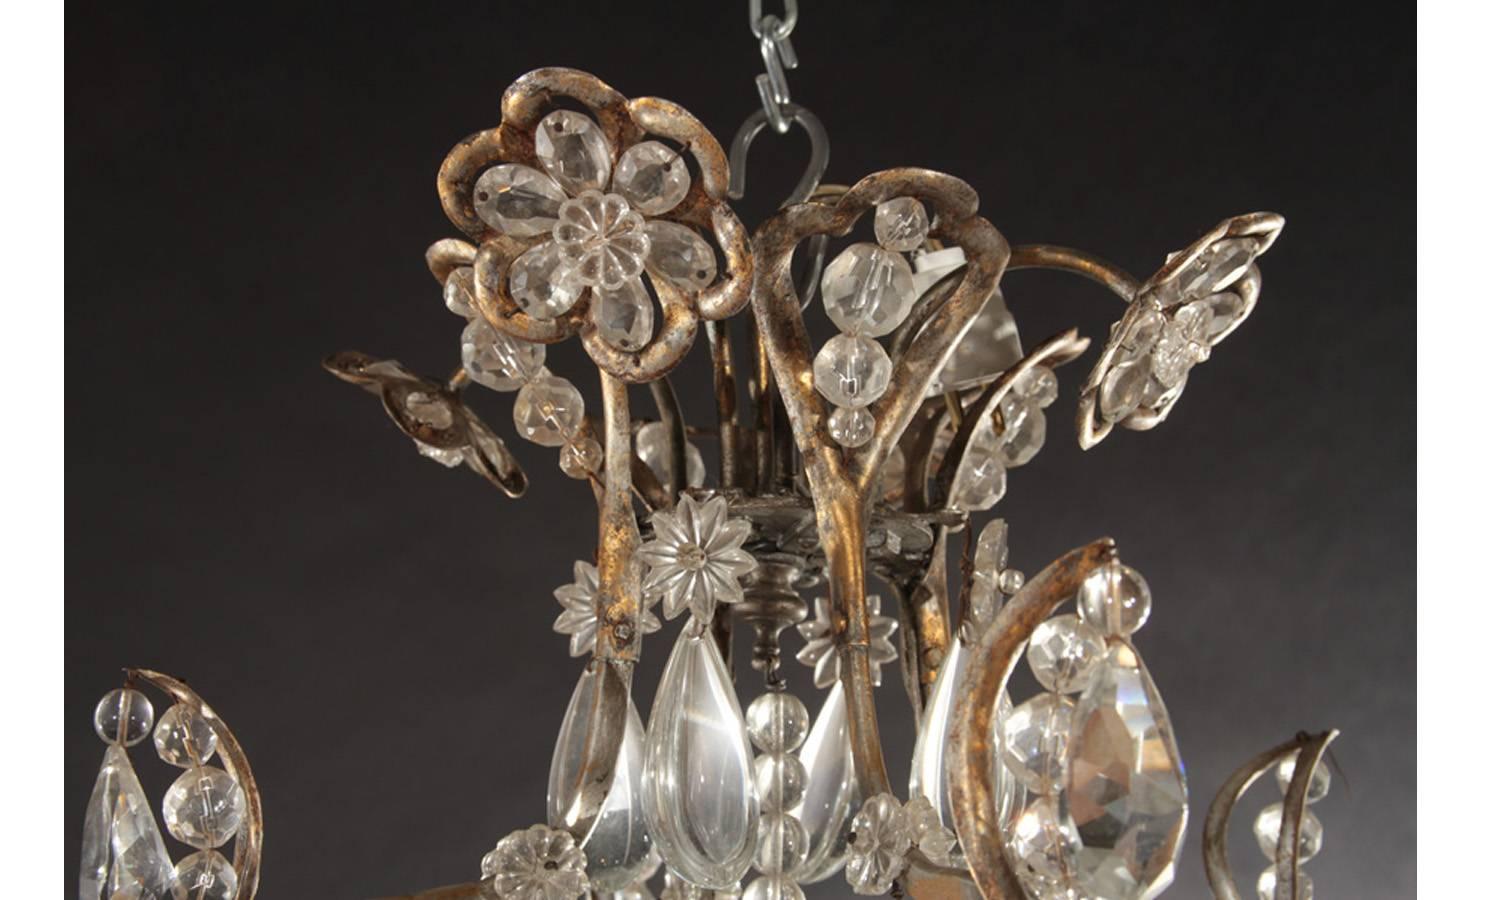 Hollywood Regency Gilt Decorated Wrought Iron and Crystal Twelve-Arm Chandelier For Sale 1